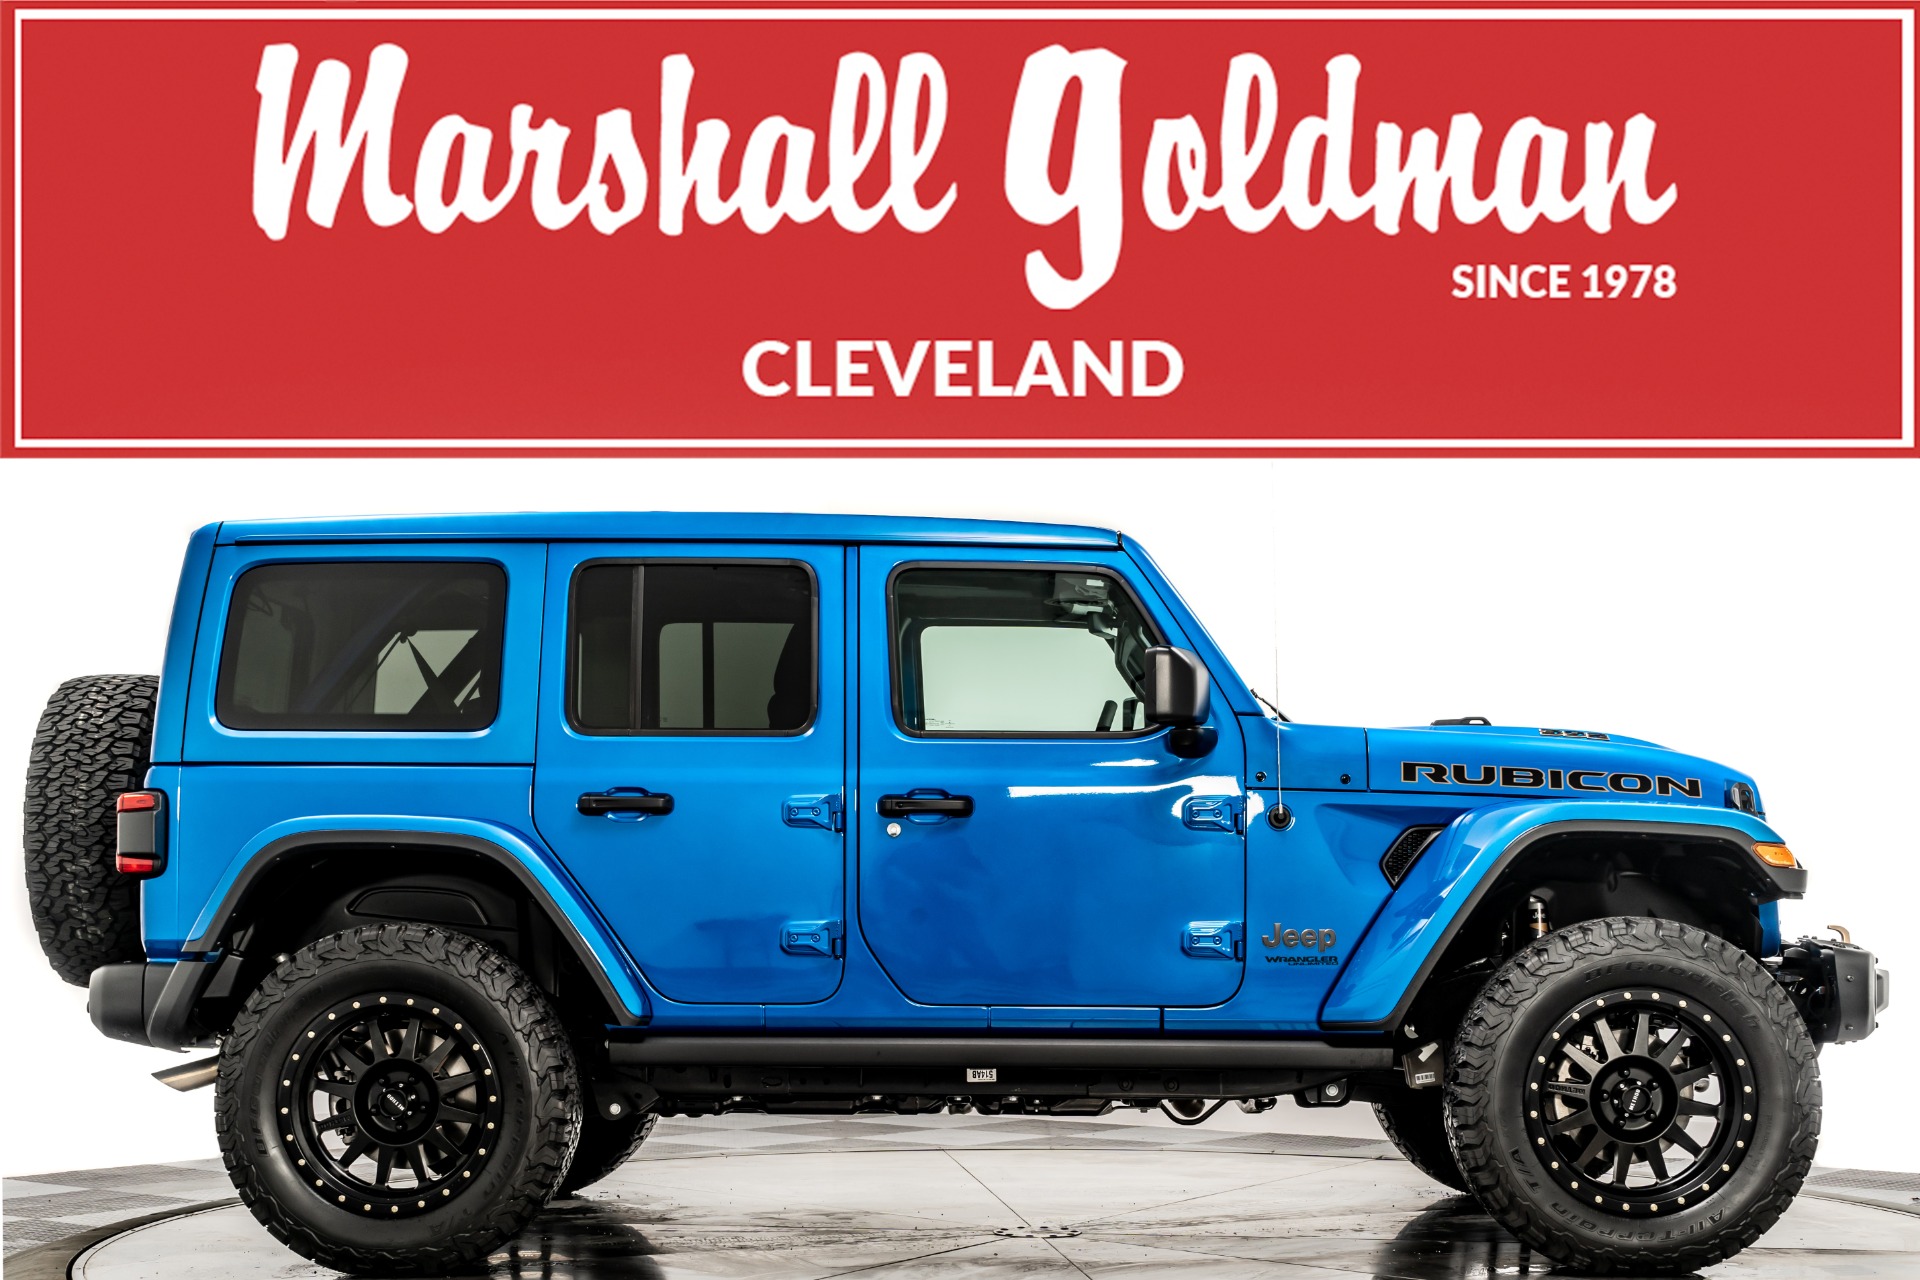 Used 2021 Jeep Wrangler Unlimited Rubicon 392 For Sale (Sold) | Marshall  Goldman Cleveland Stock #WJW392BL2